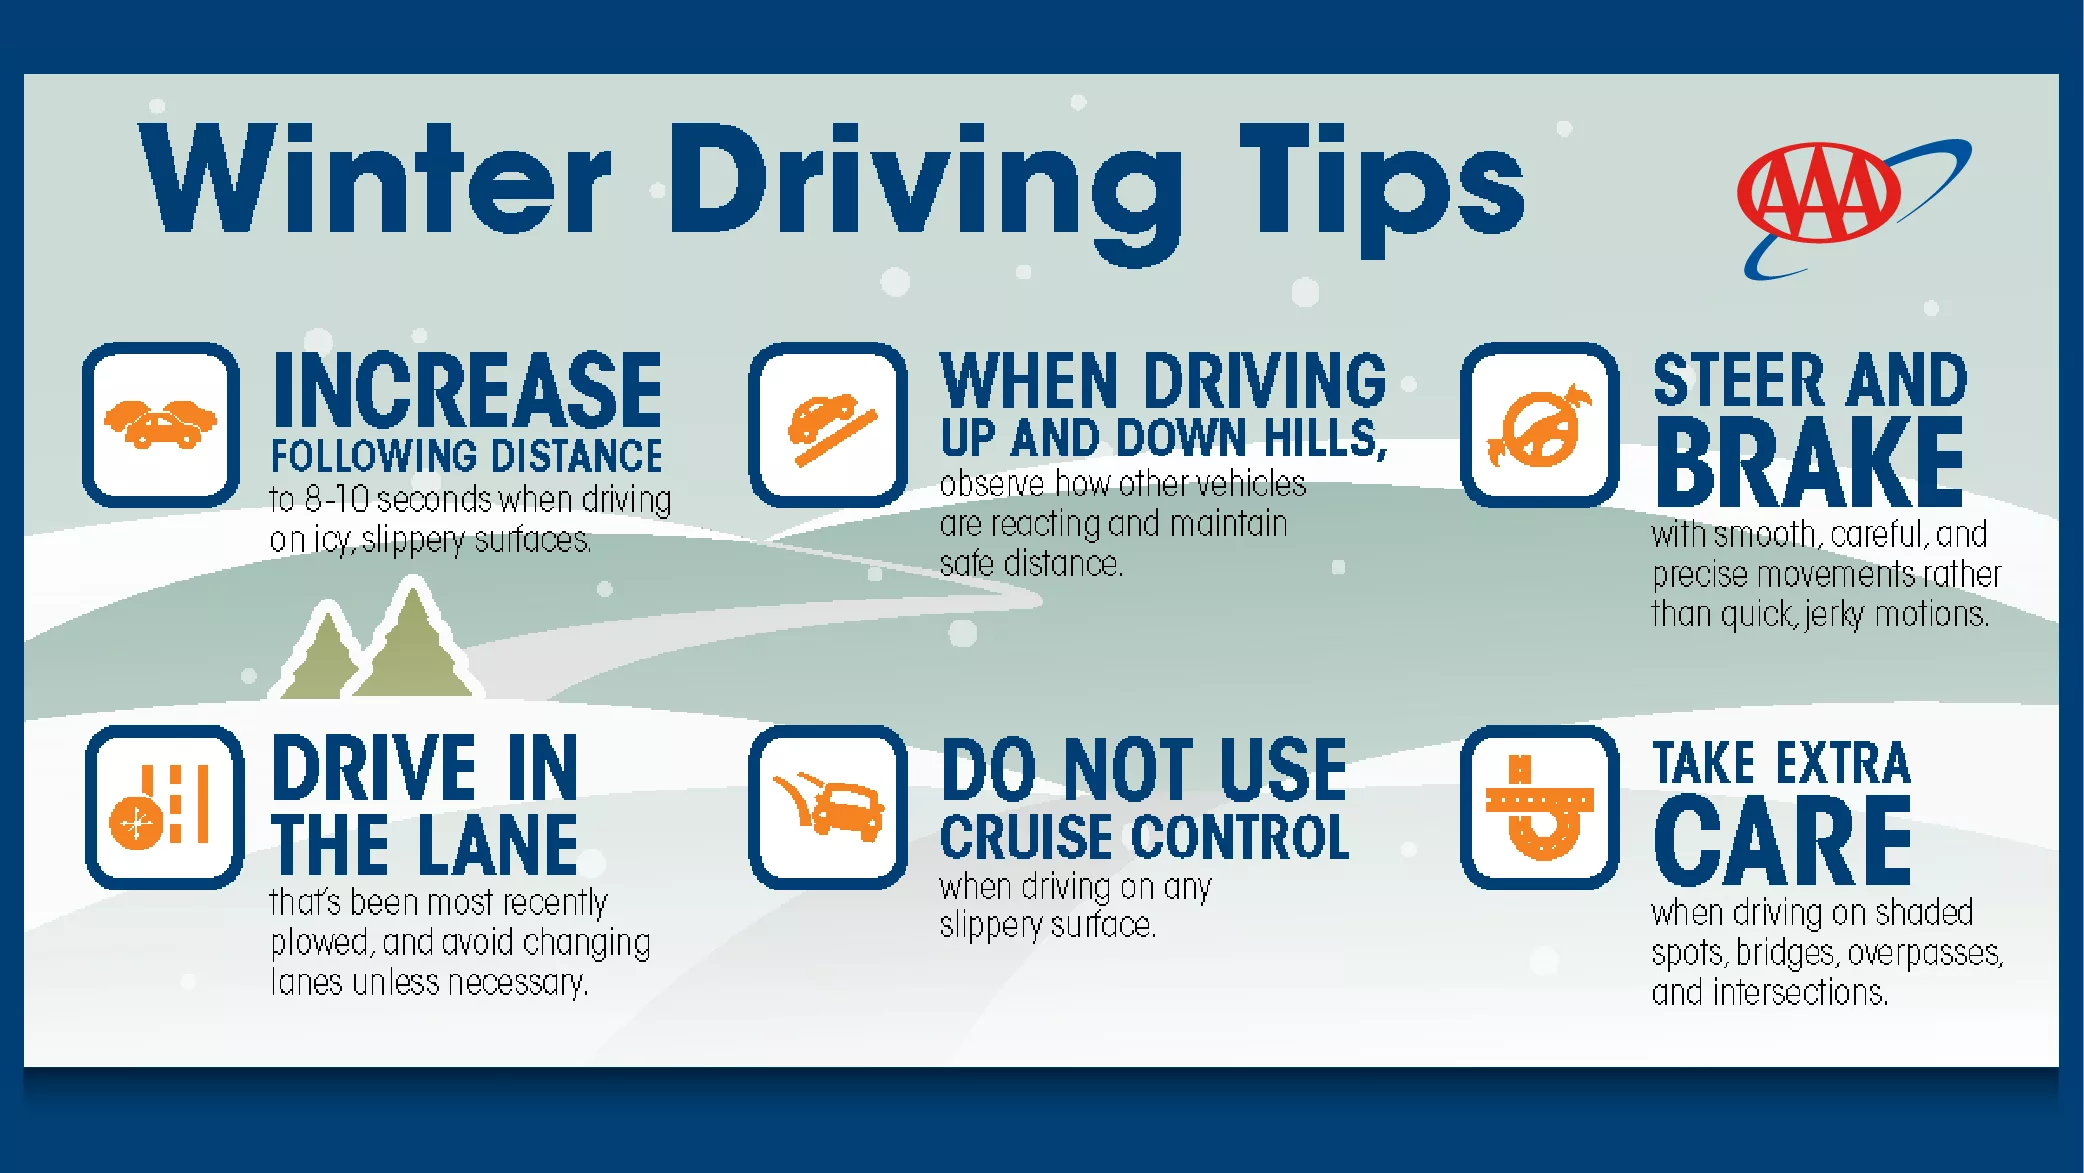 Tips on how to drive safely on snow and ice